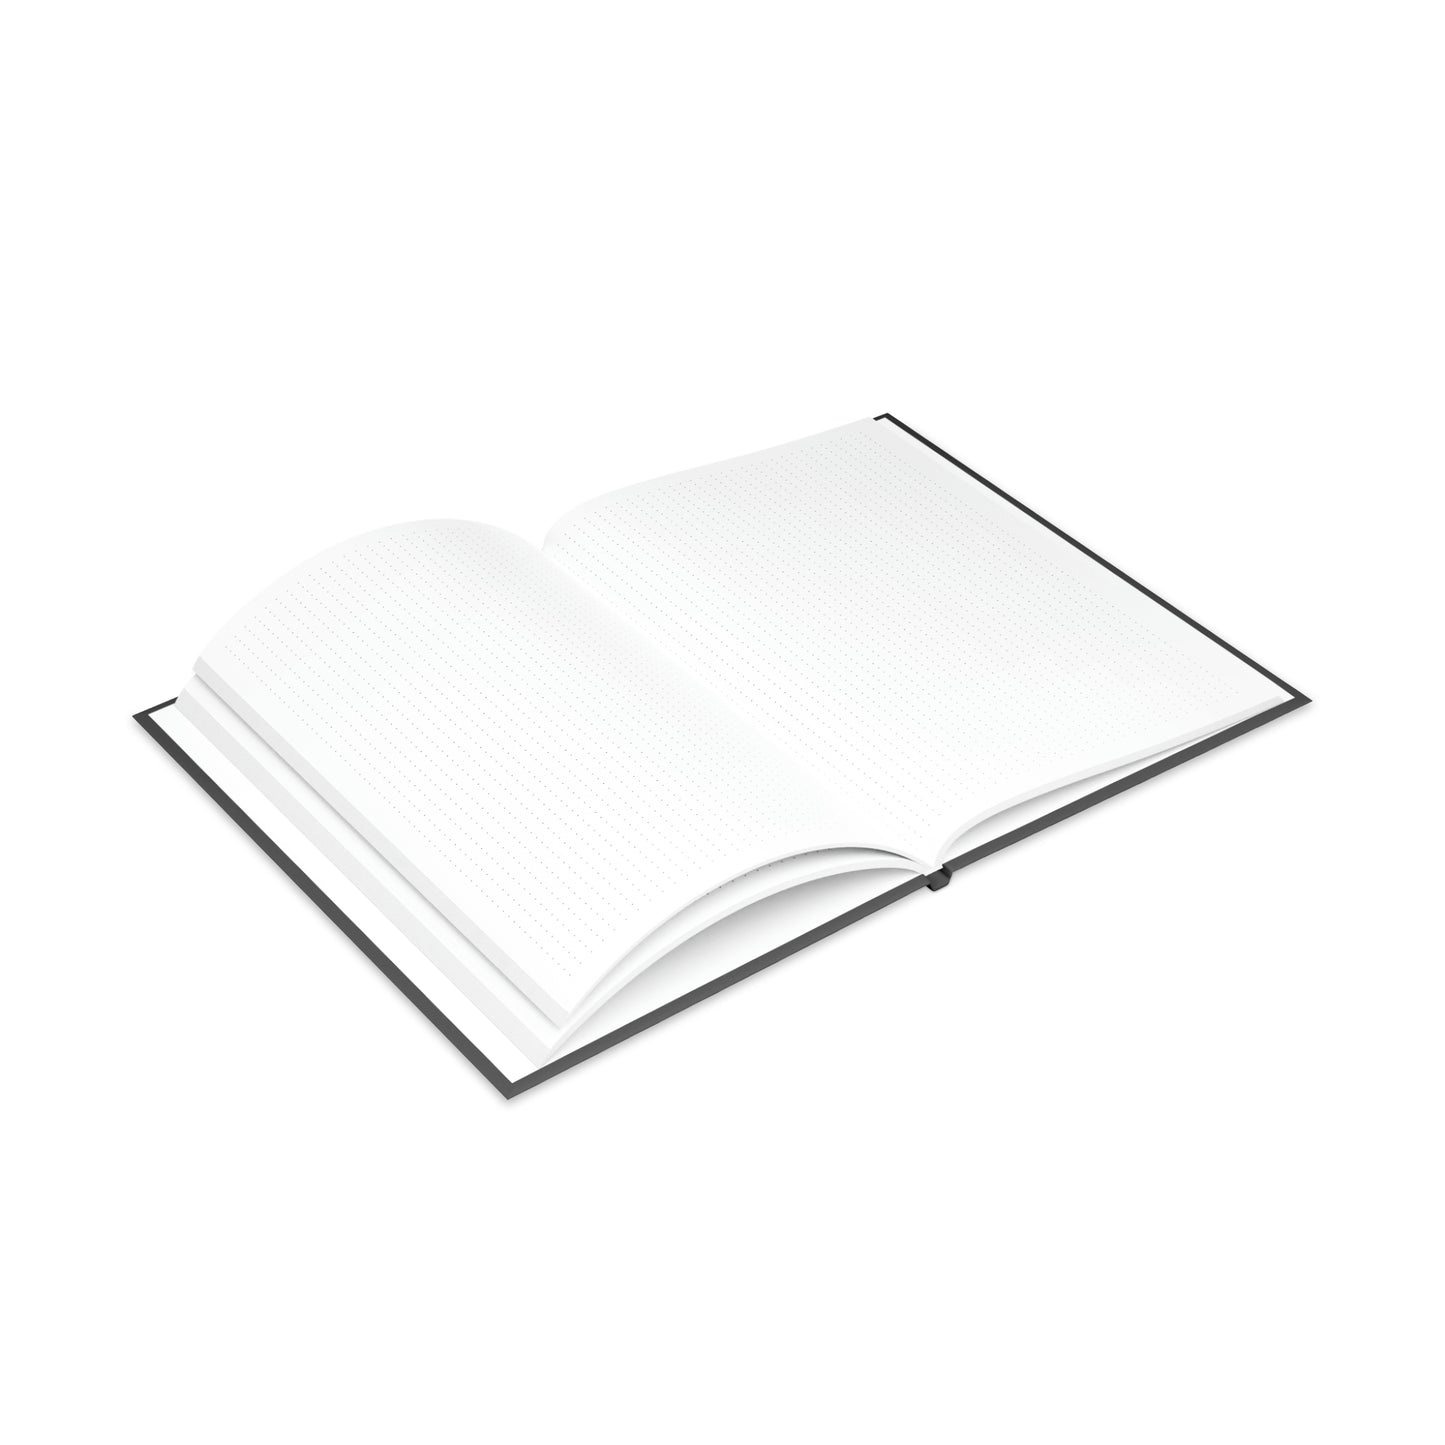 Draw Like Chris Jackson Hardcover Notebook with Puffy Covers